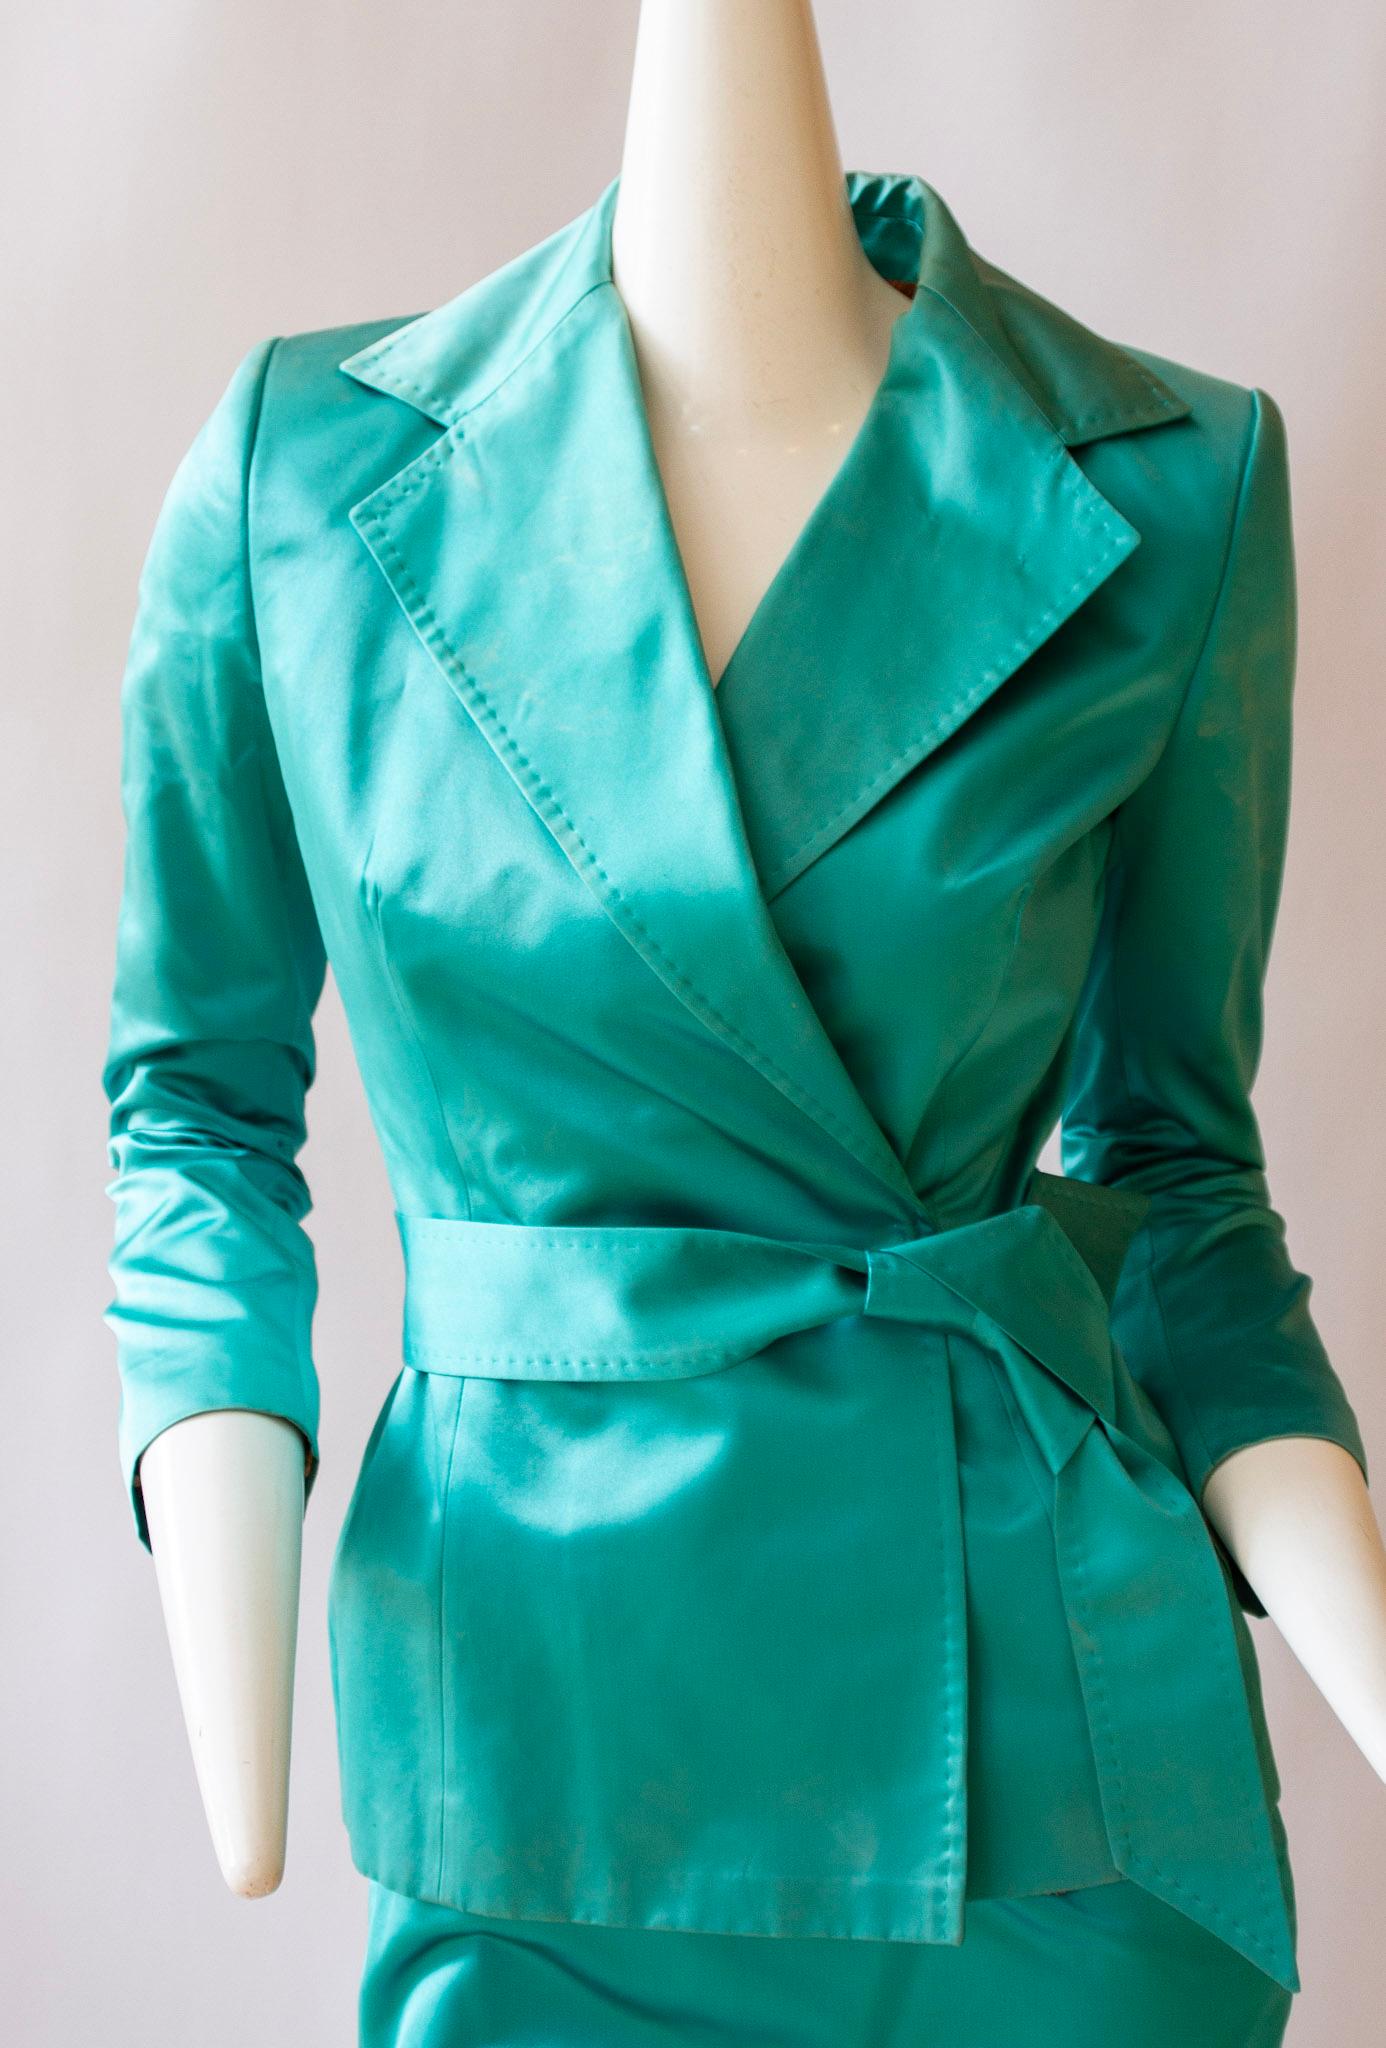 Dolce & Gabbana, Two Piece 100% Silk Turquoise Skirt Suit Ensemble  In Excellent Condition For Sale In Kingston, NY